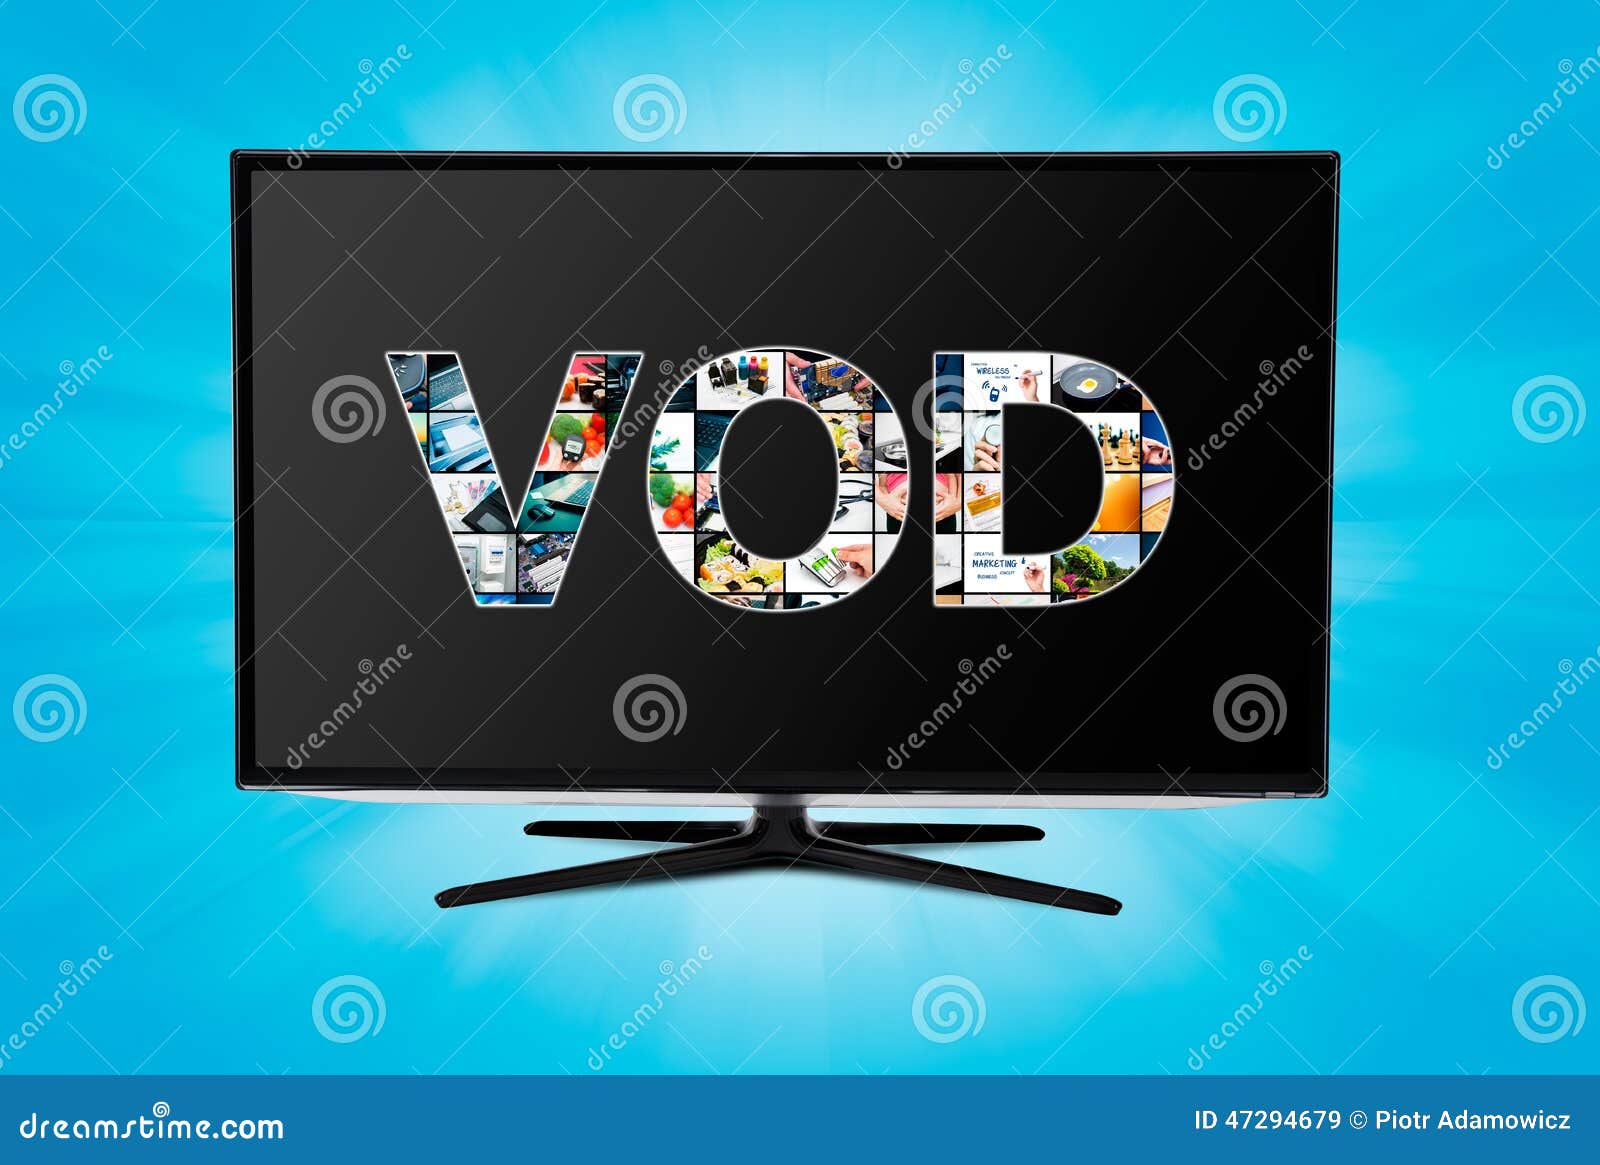 Video on Demand VOD Service on Smart TV Stock Image